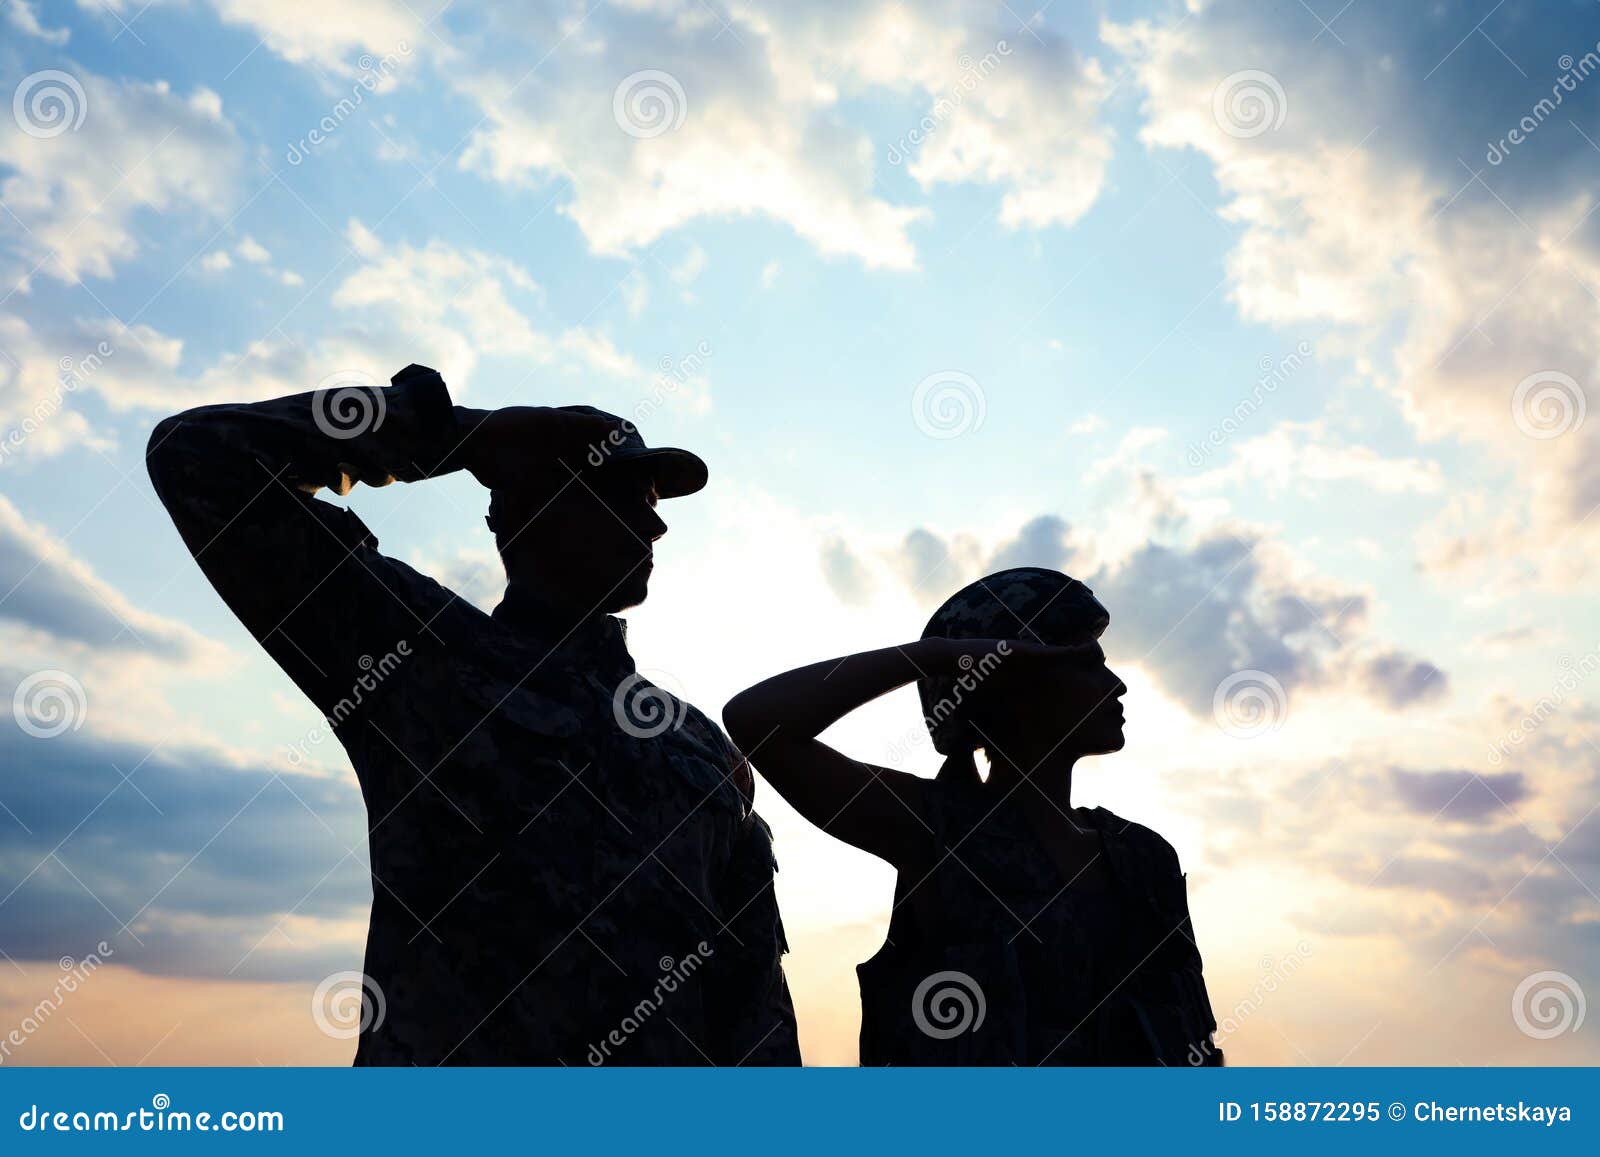 soldiers in uniform saluting. military service